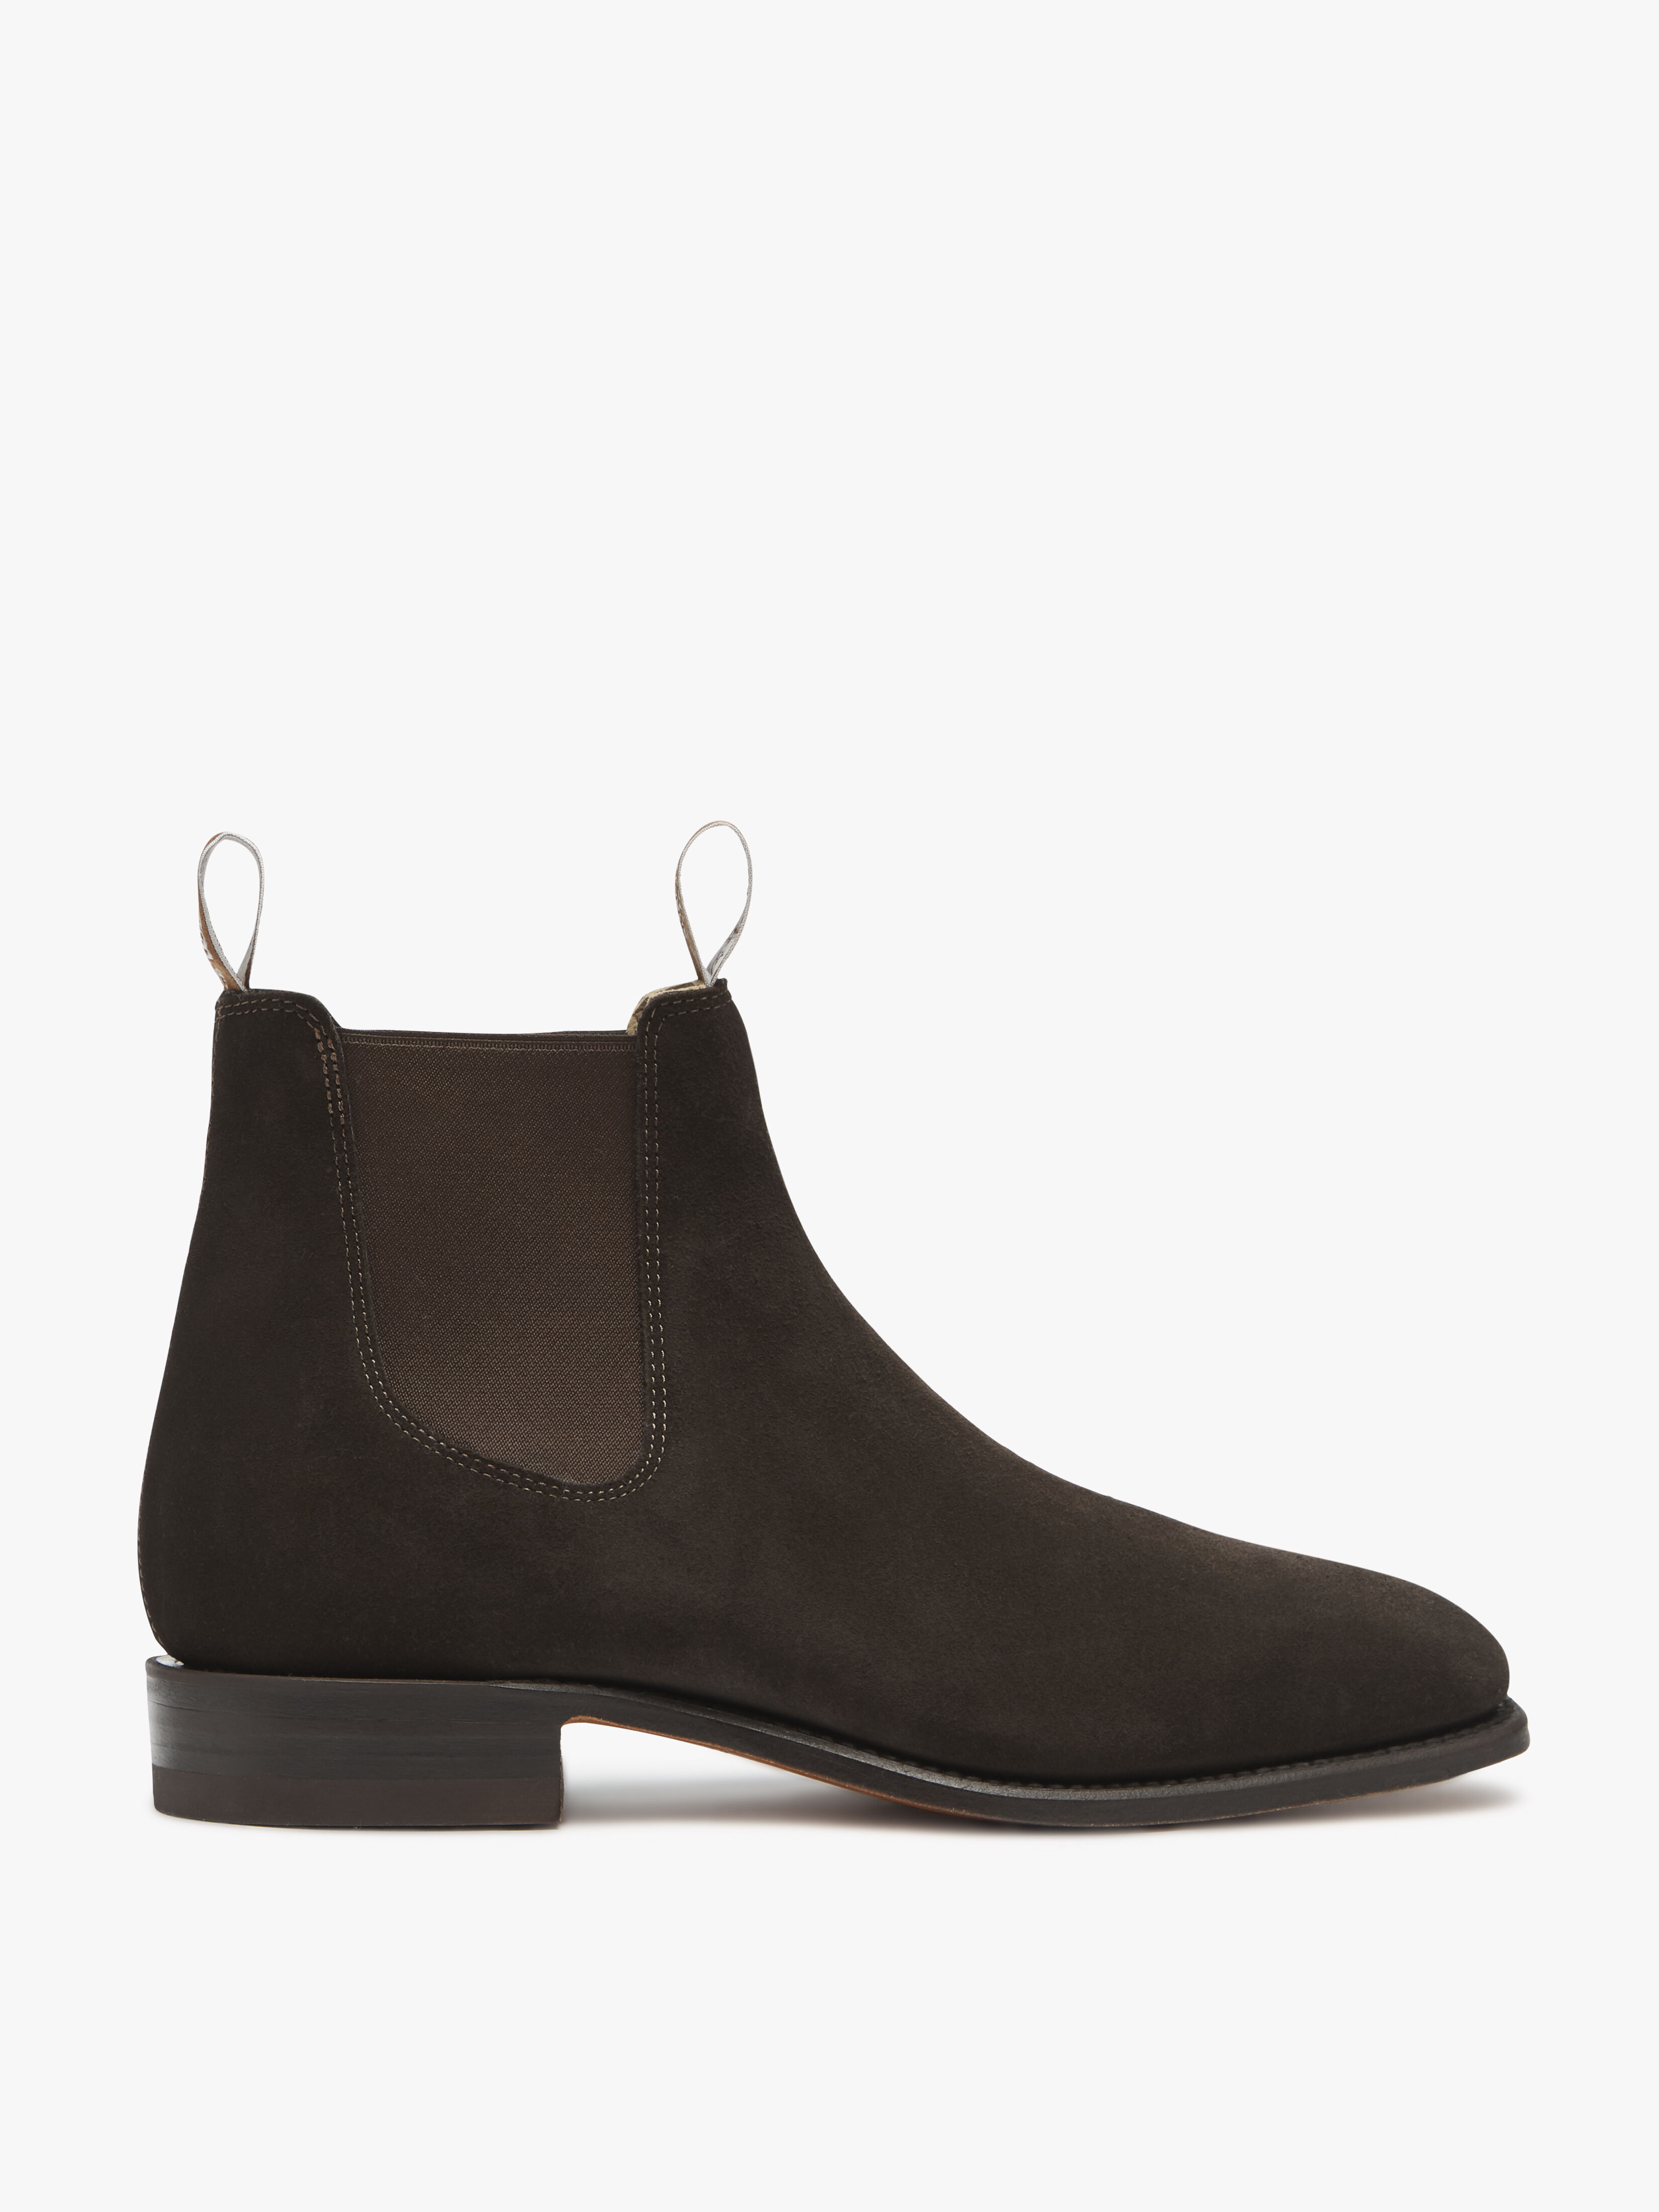 rm williams mens suede boots